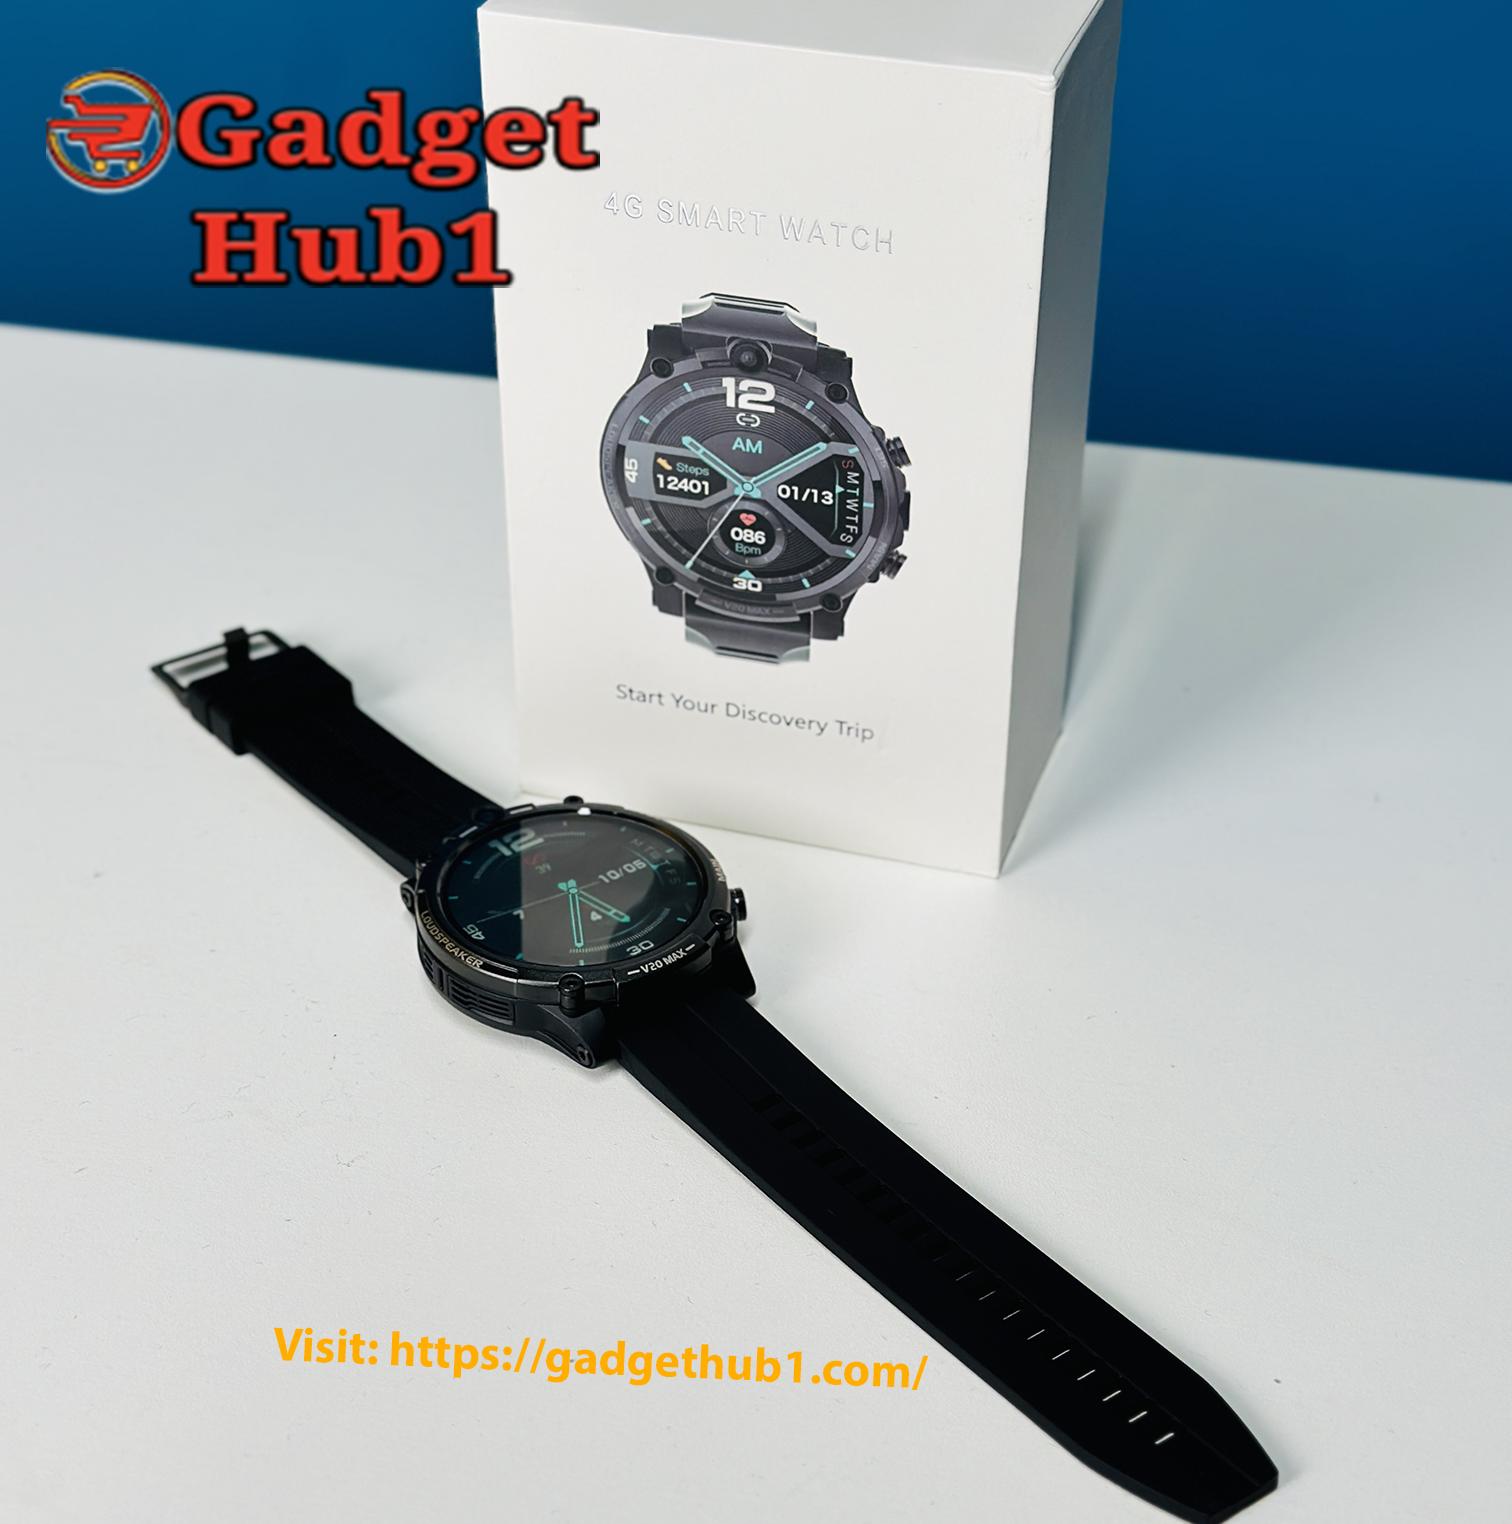 4G LTE Android Smartwatch with 2GB RAM, 16GB Storage, and Dual Camera (V20 Max)